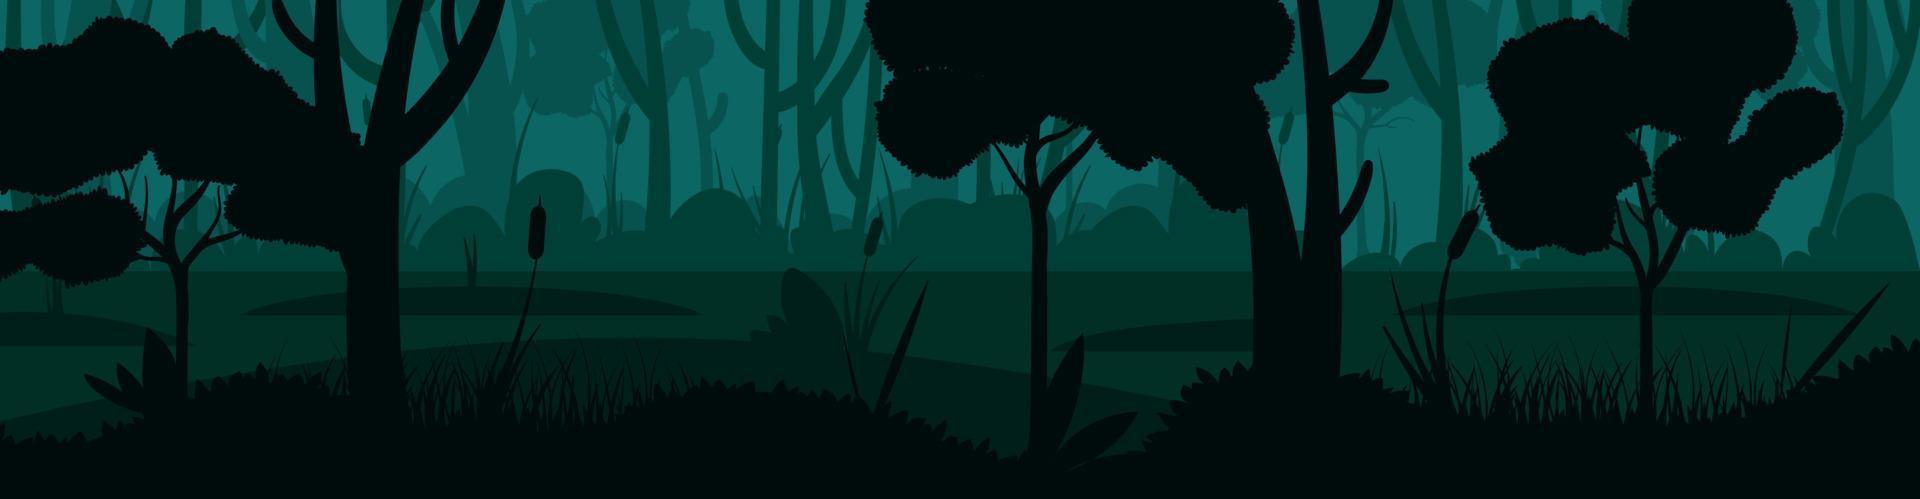 Vector scene illustration of beautiful night landscape, layered green silhouette trees, forest swamp background in flat banner paper cartoon style